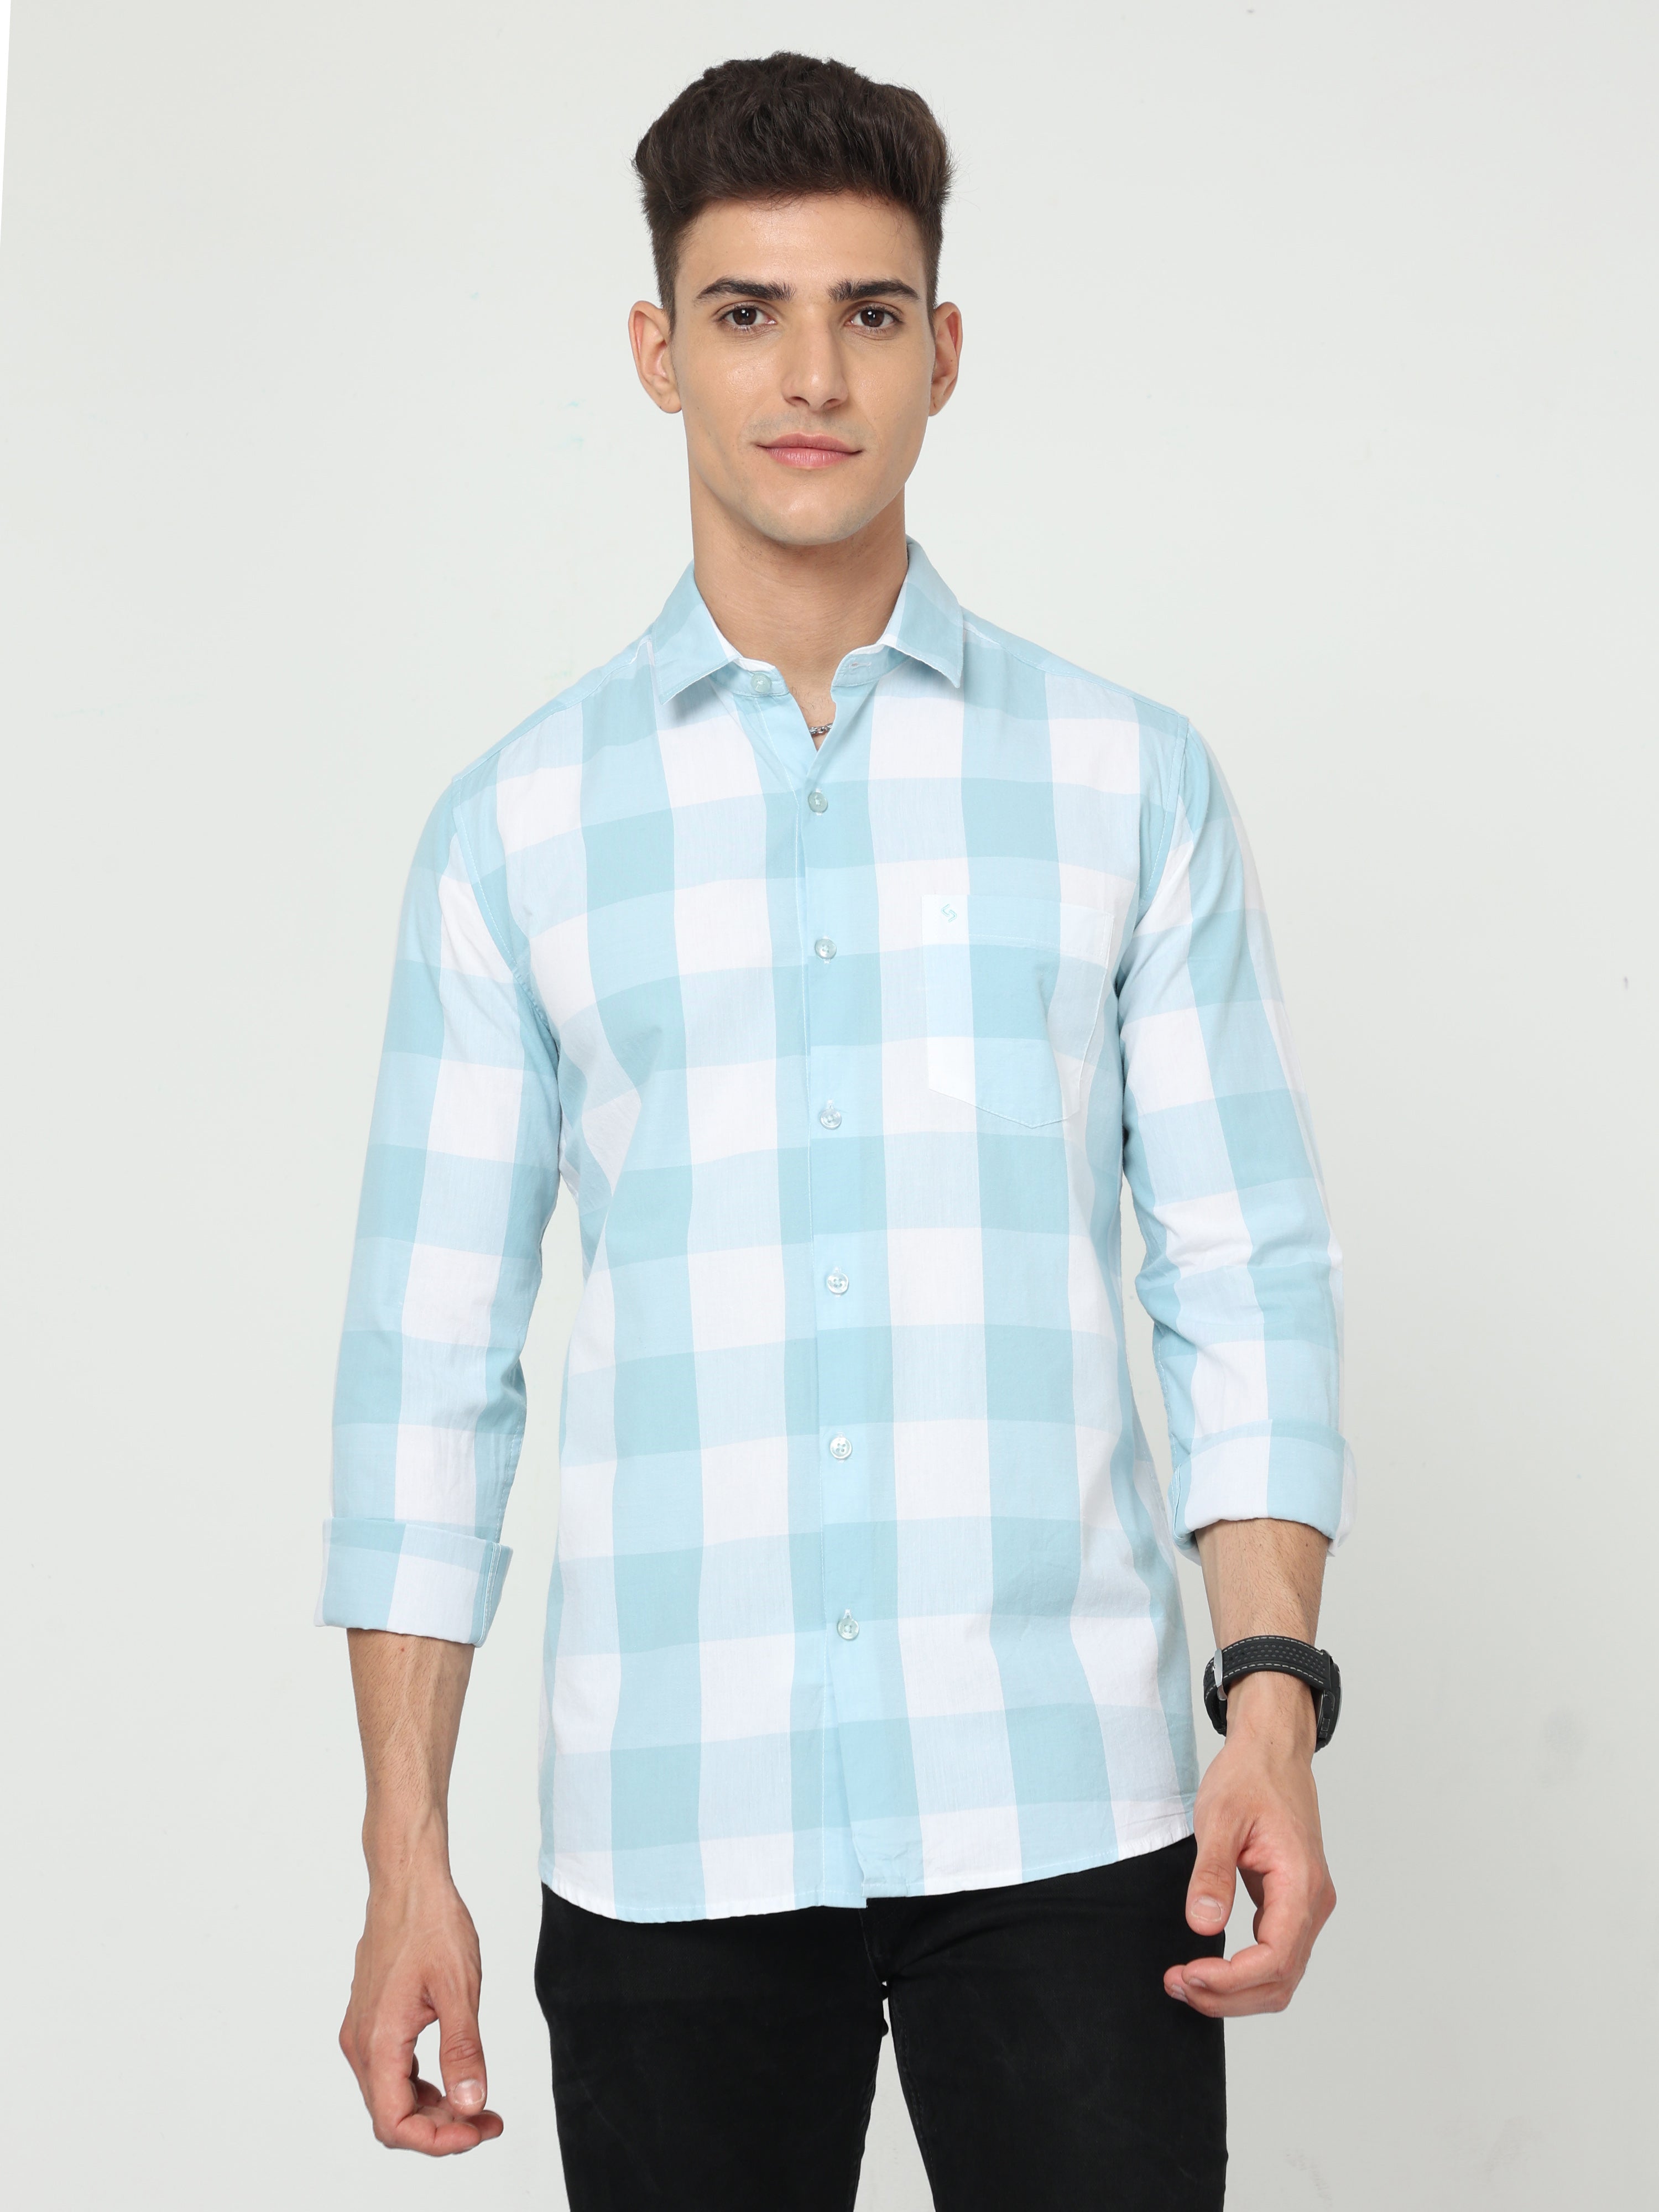 Check Men's Cotton Casual Shirt - Wholesale, Full sleeves at Rs